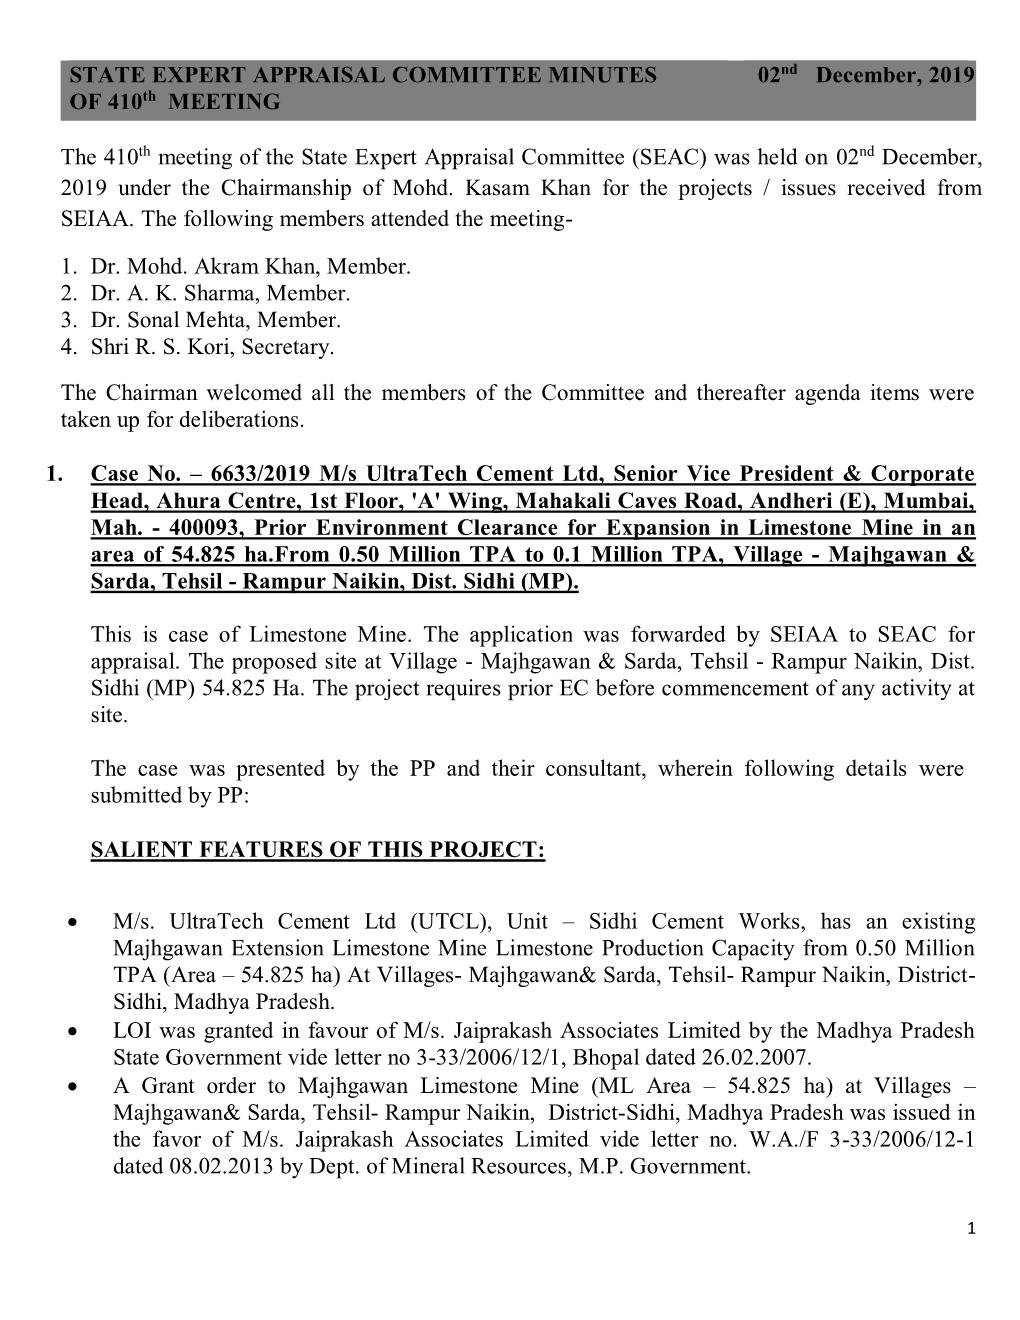 STATE EXPERT APPRAISAL COMMITTEE MINUTES of 410Th MEETING 02Nd December, 2019 the 410Th Meeting of the State Expert Appraisa